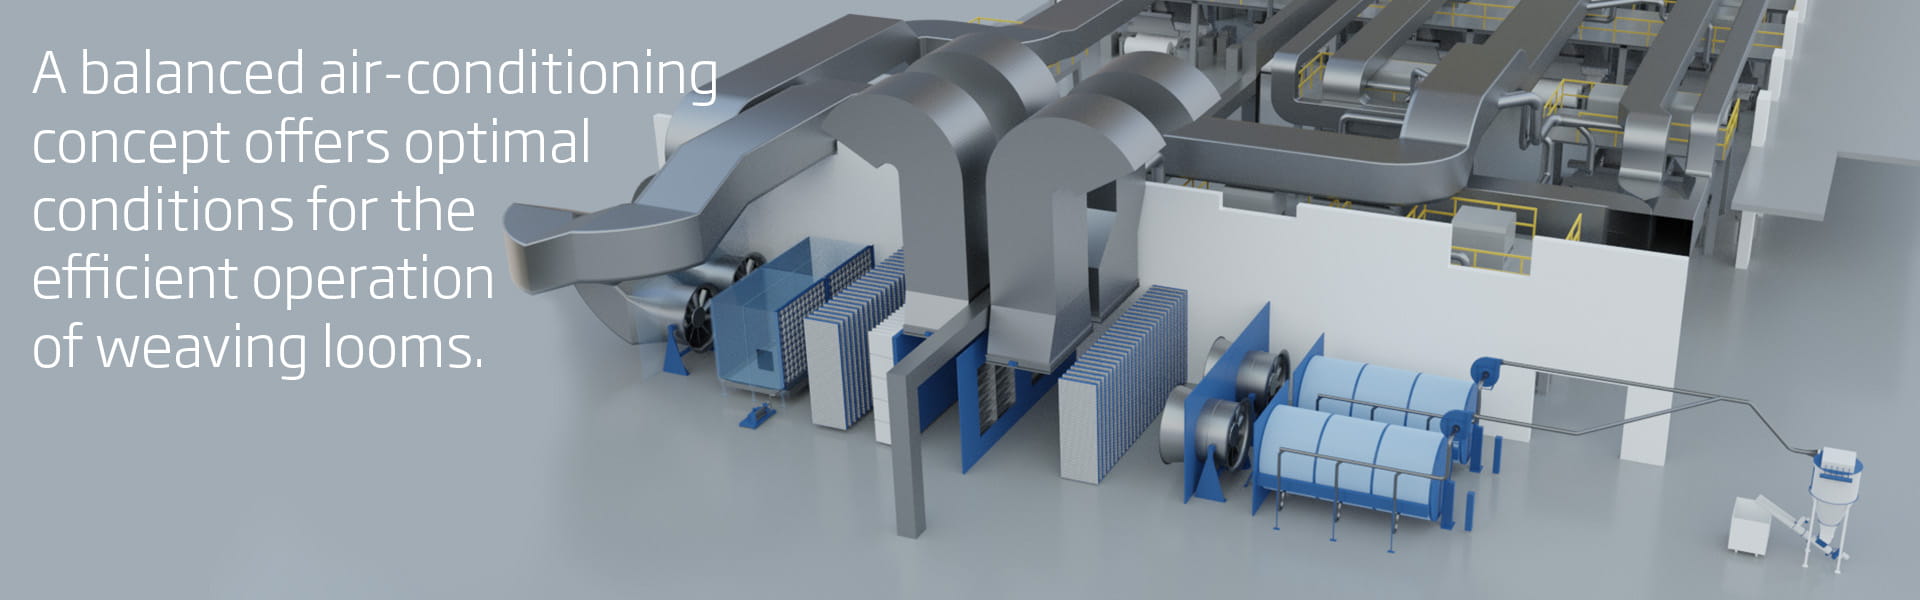 A balanced air-conditioning concept offers optimal conditions for the efficient operation of weaving looms